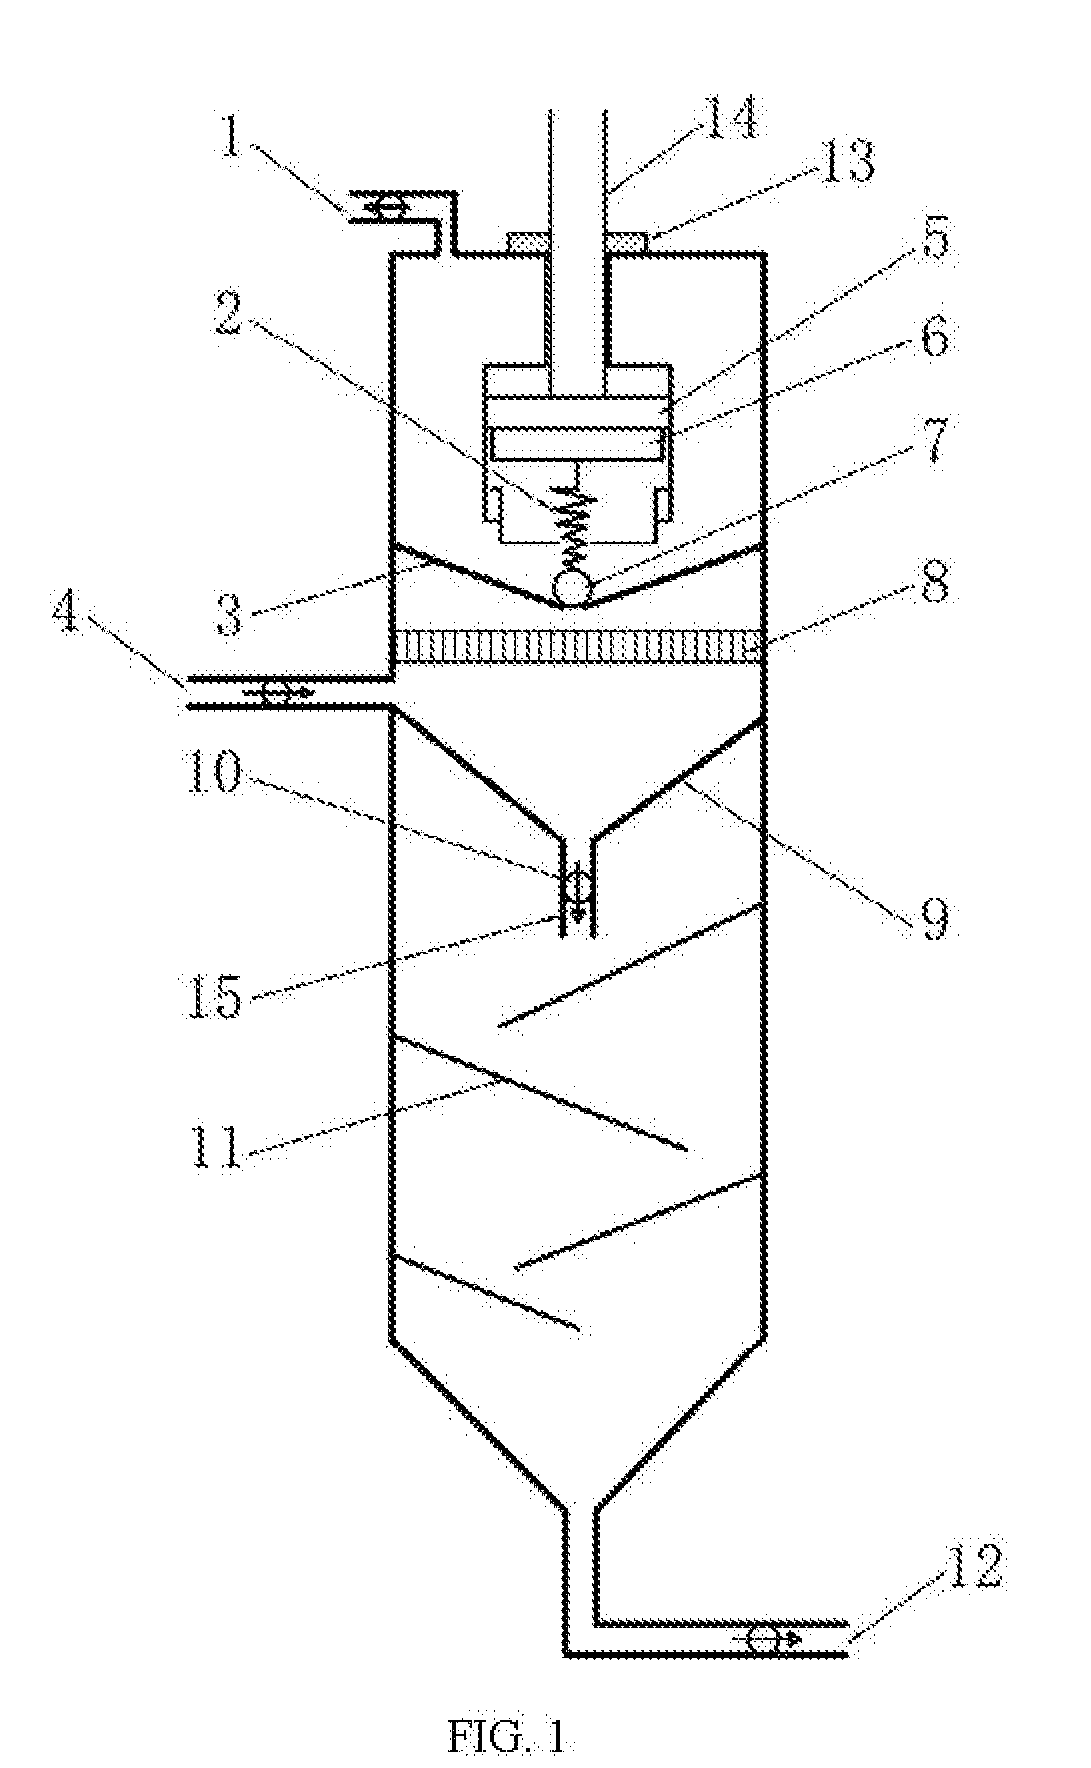 Gas-liquid separation apparatus suitable for gas hydrate slurry